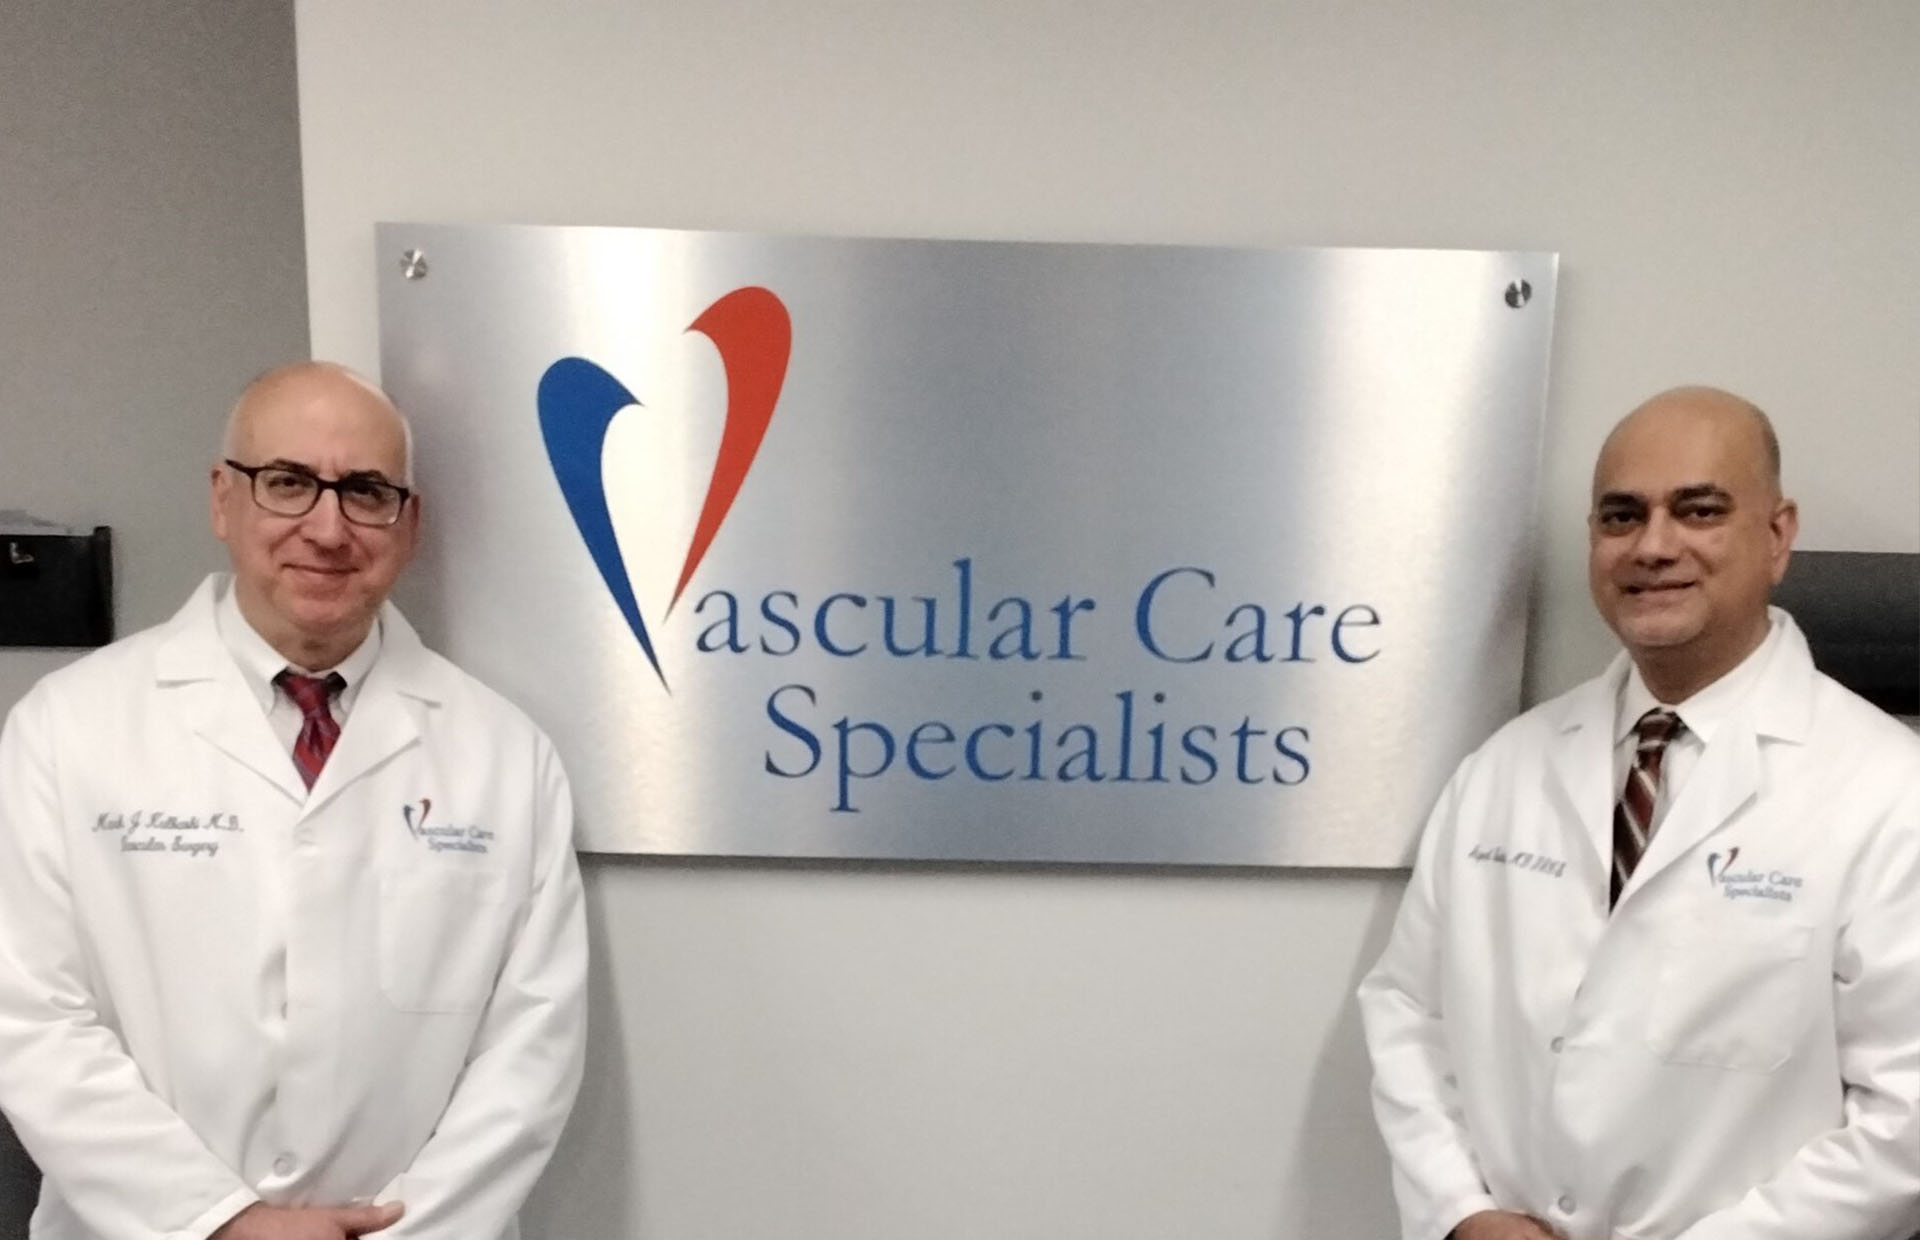 Vascular Care Specialists | Vascular Ultrasound, Arterial Disease and Endovascular Surgery